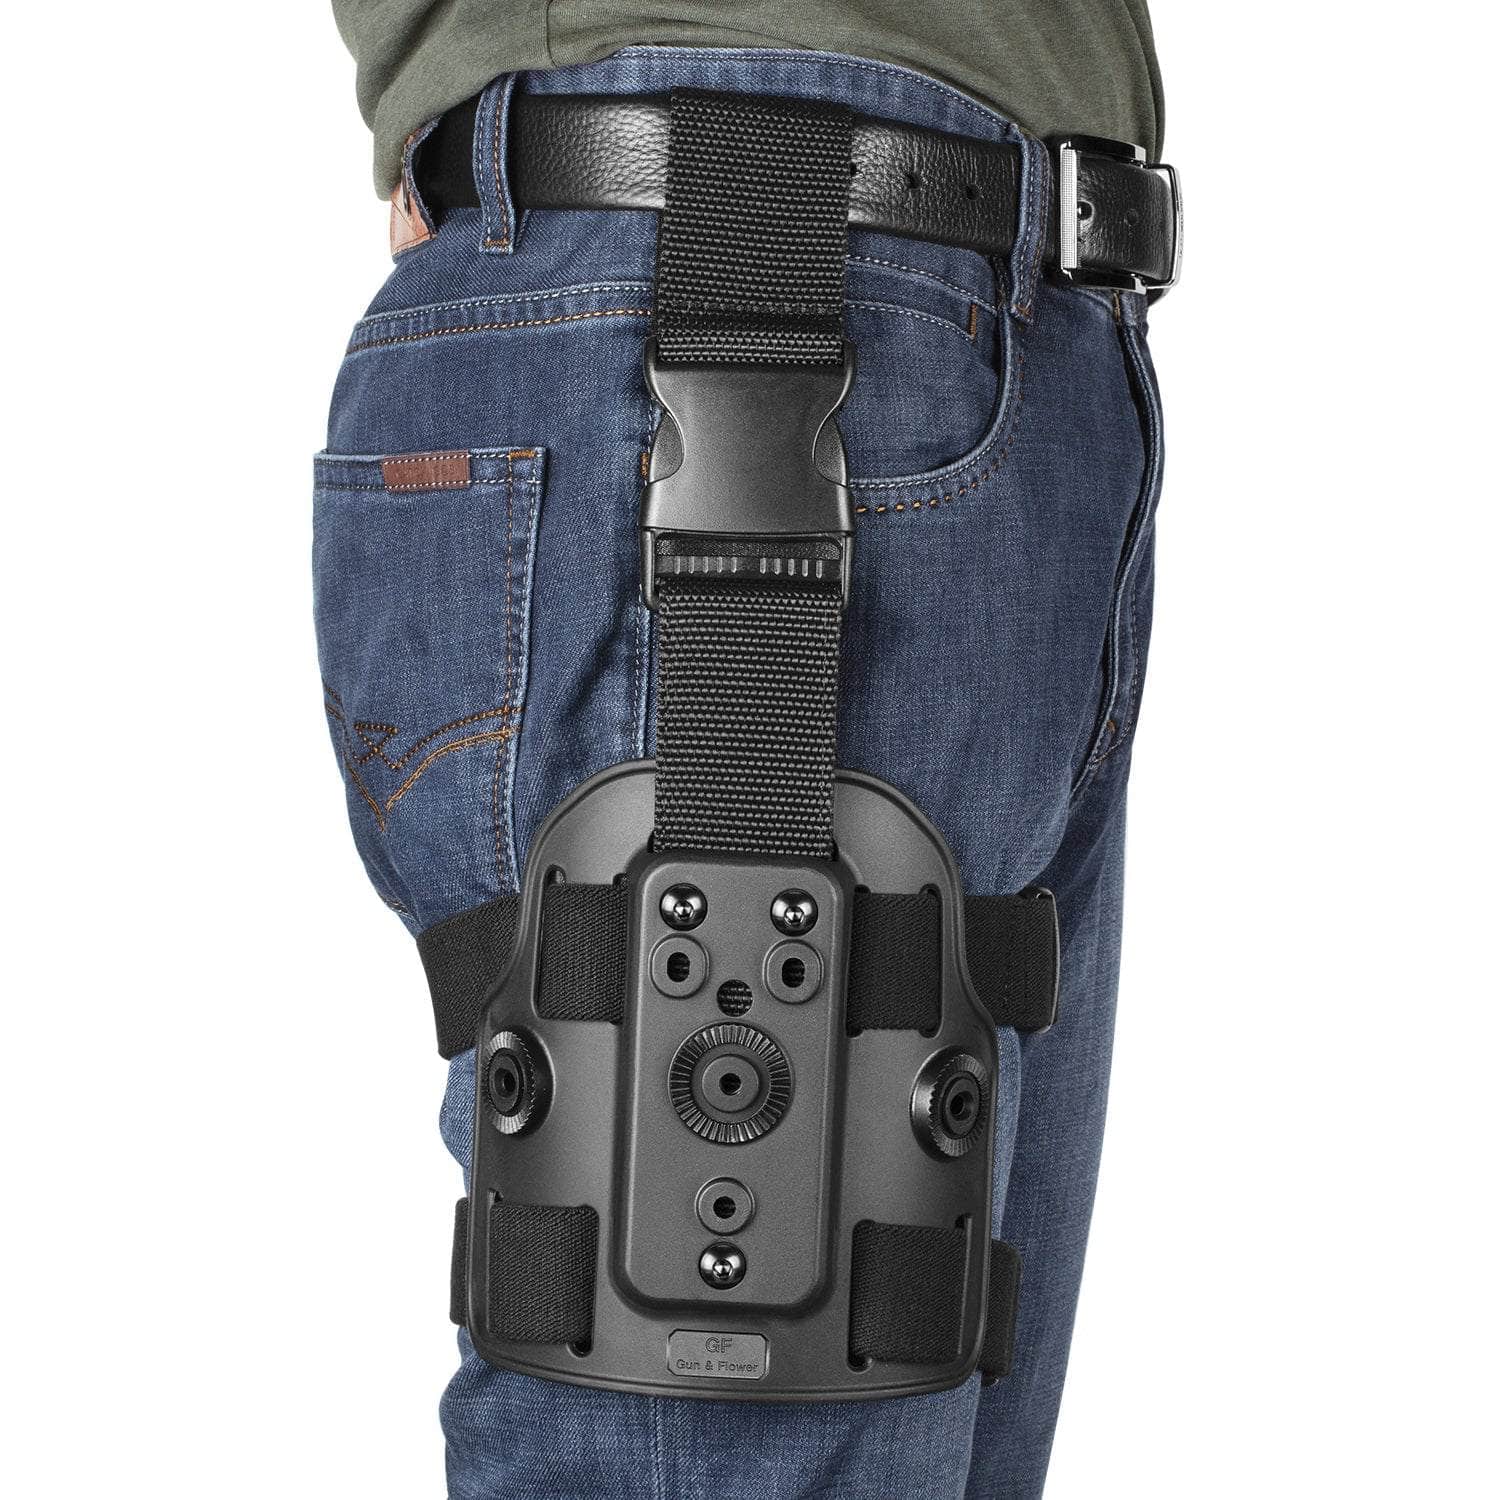 What About a Drop Leg Mag Pouch?